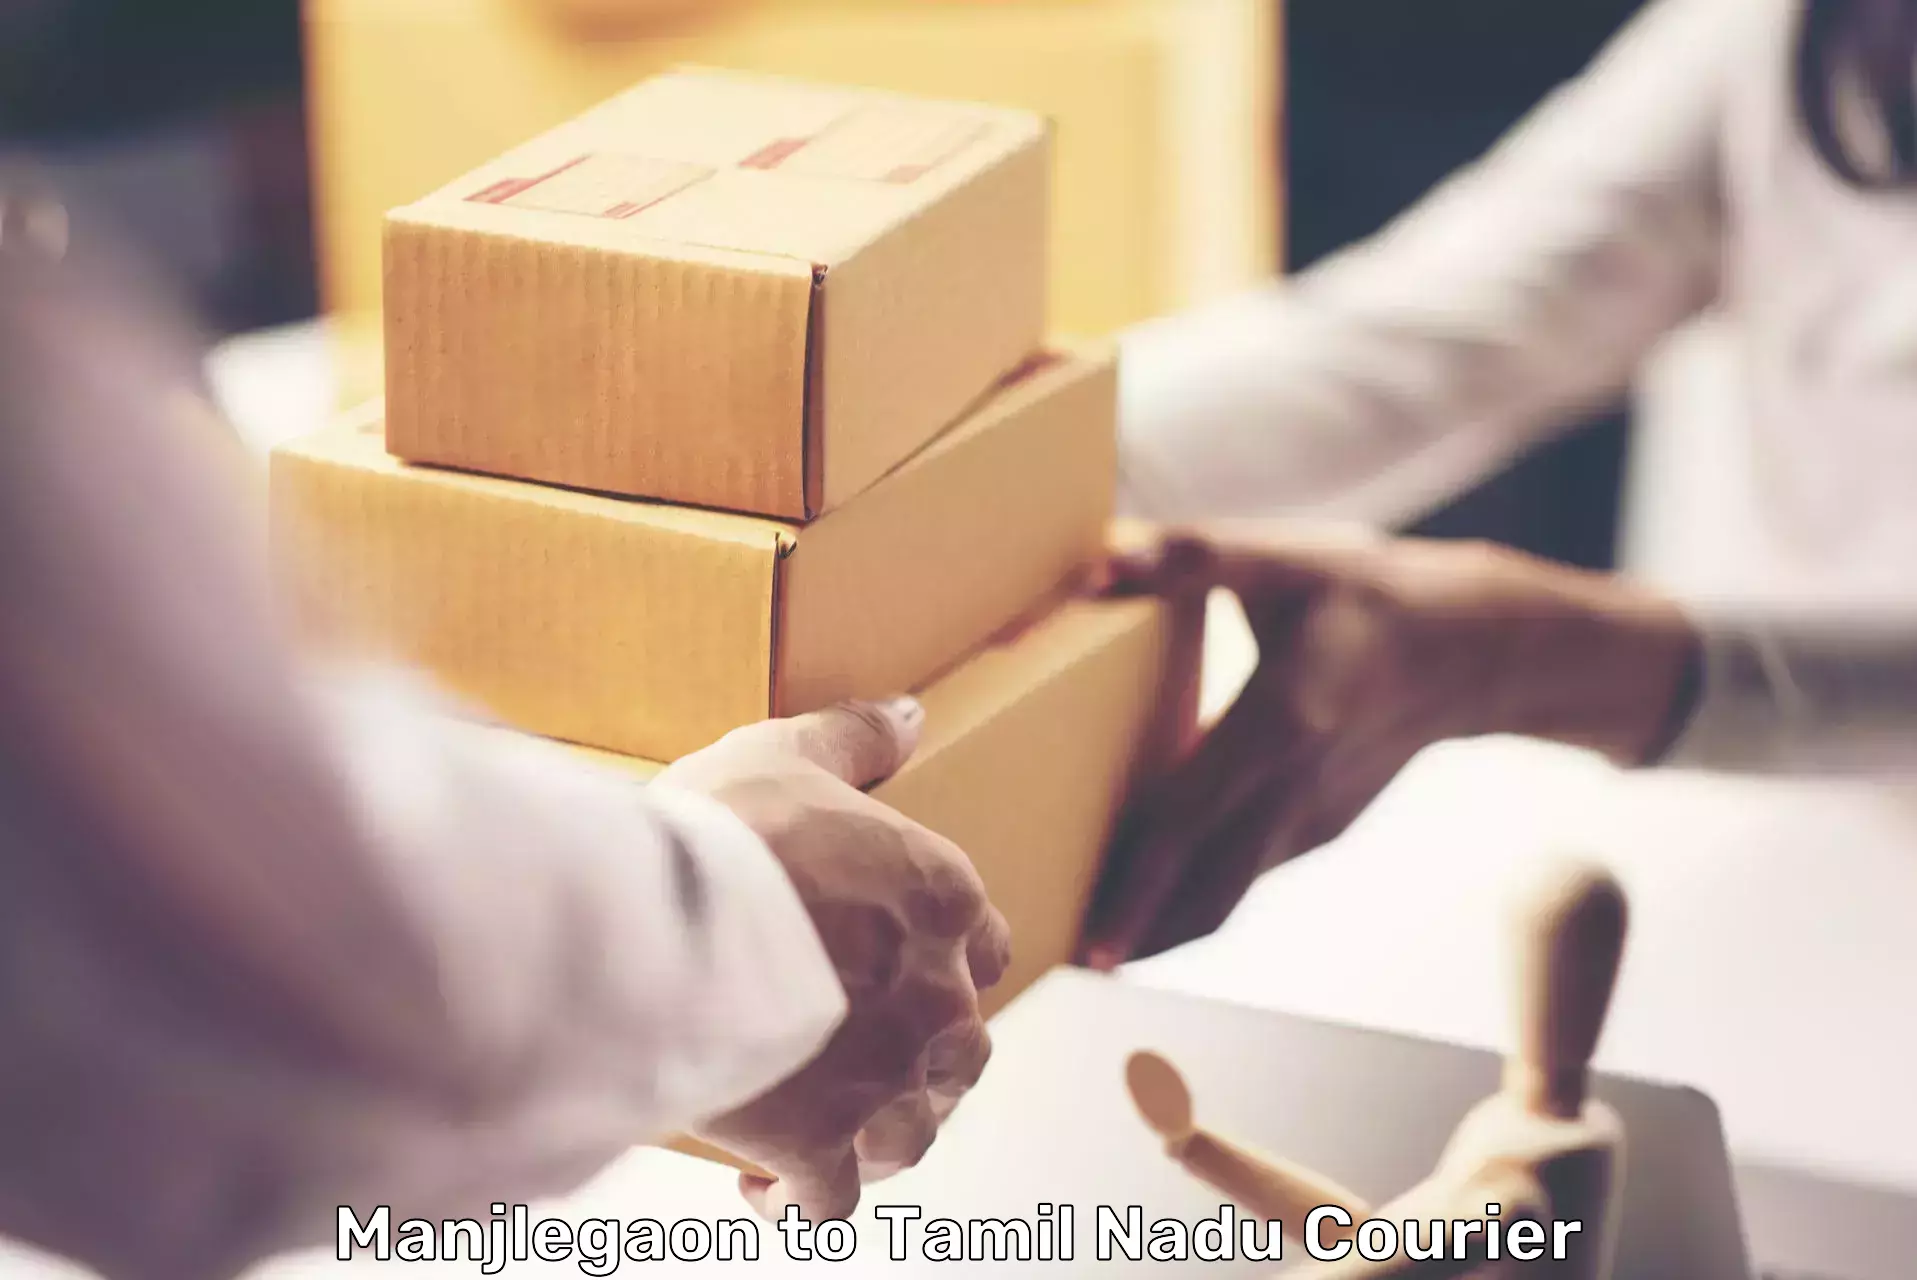 High-quality delivery services Manjlegaon to Memalur